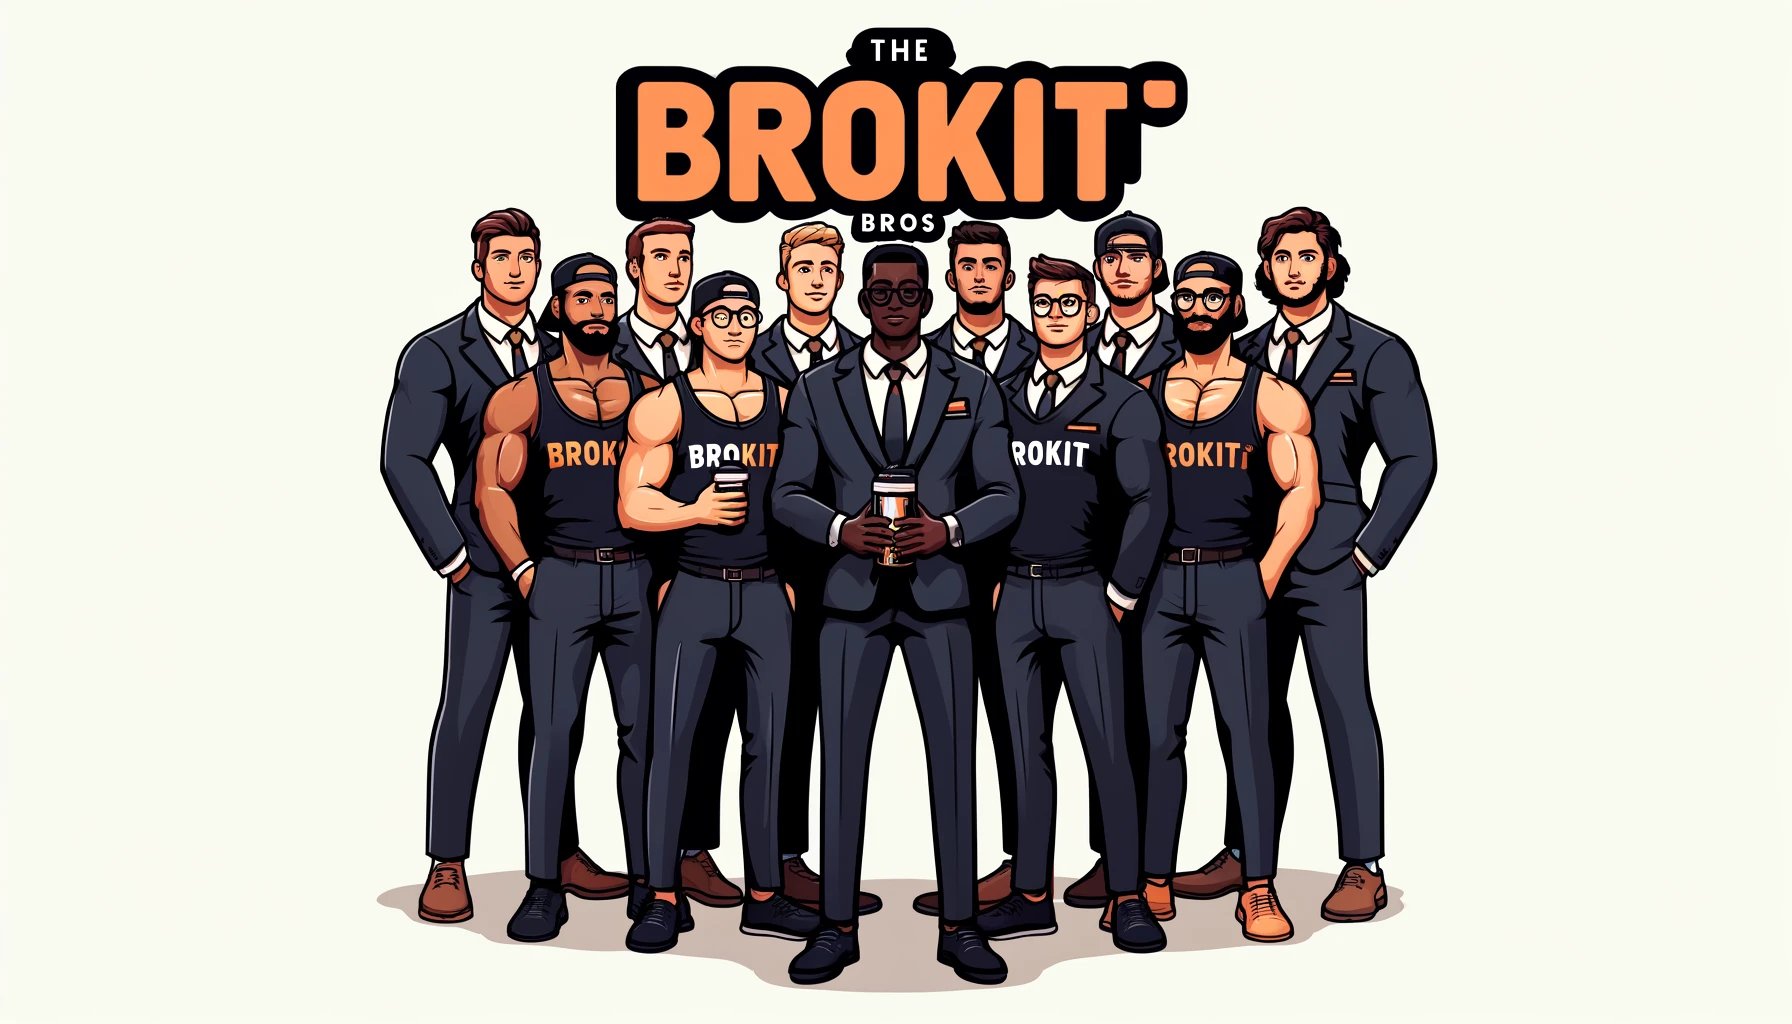 AI Generated image of the Brokit bros. A group of guys wearing caps, suits and brokit branded clothing